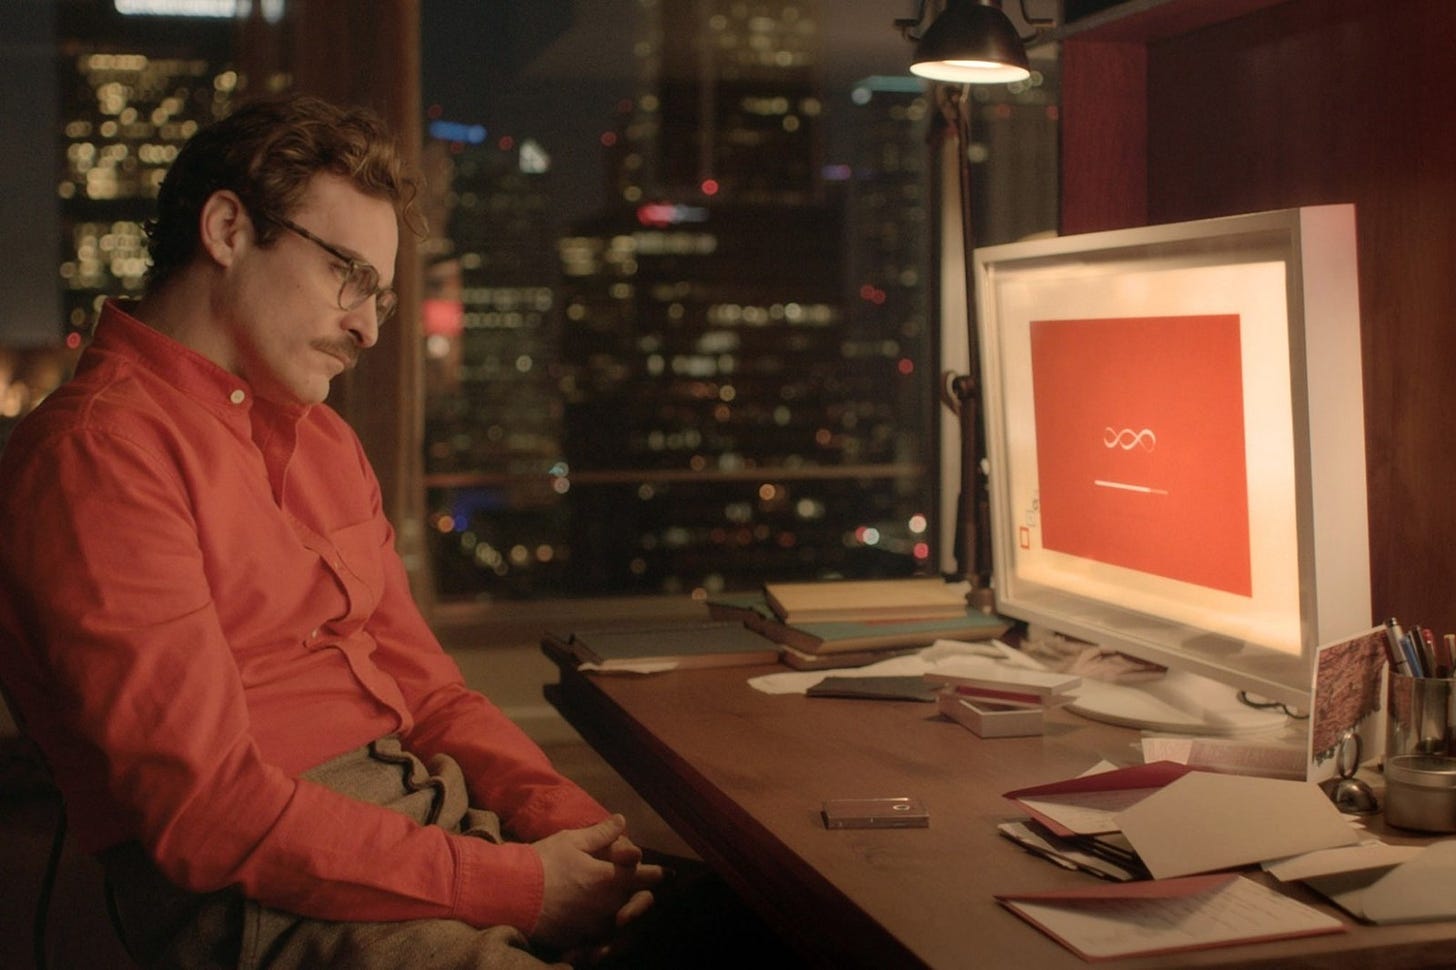 Main character of movie “Her” is looking at his computer operating system.